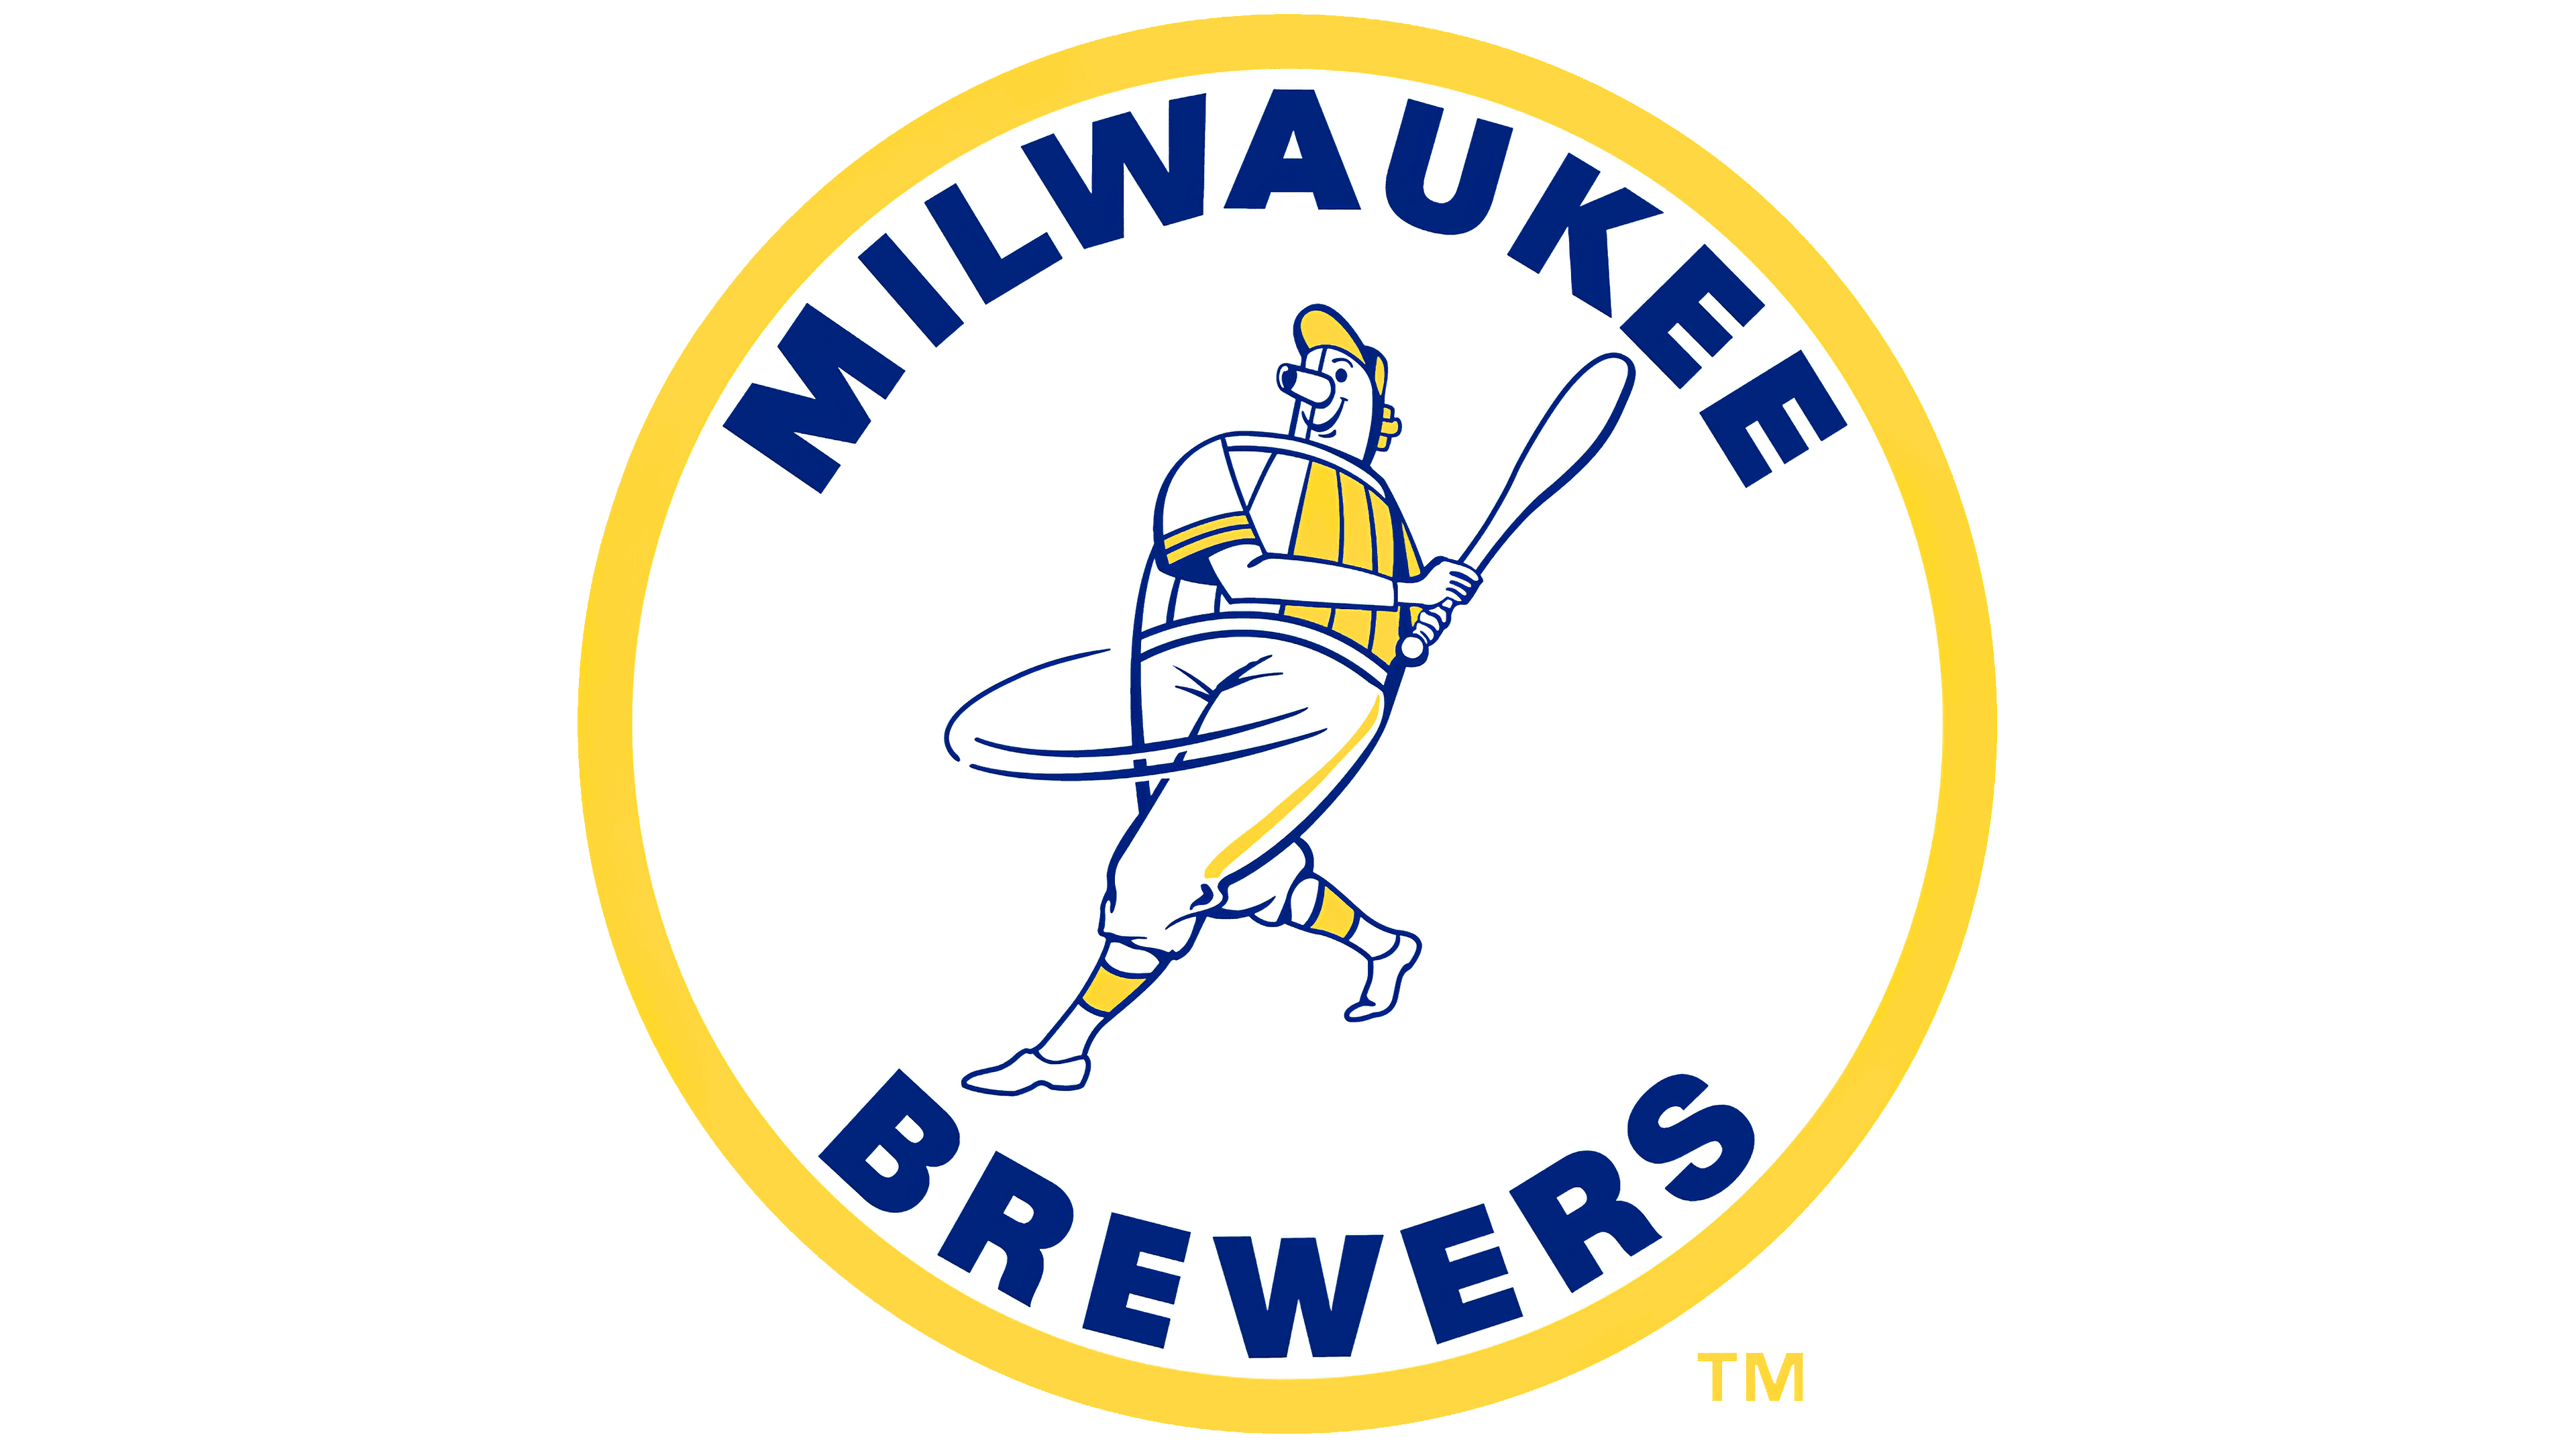 Milwaukee Brewers announce return to classic logo, new uniforms for 2020 -  Brew Crew Ball